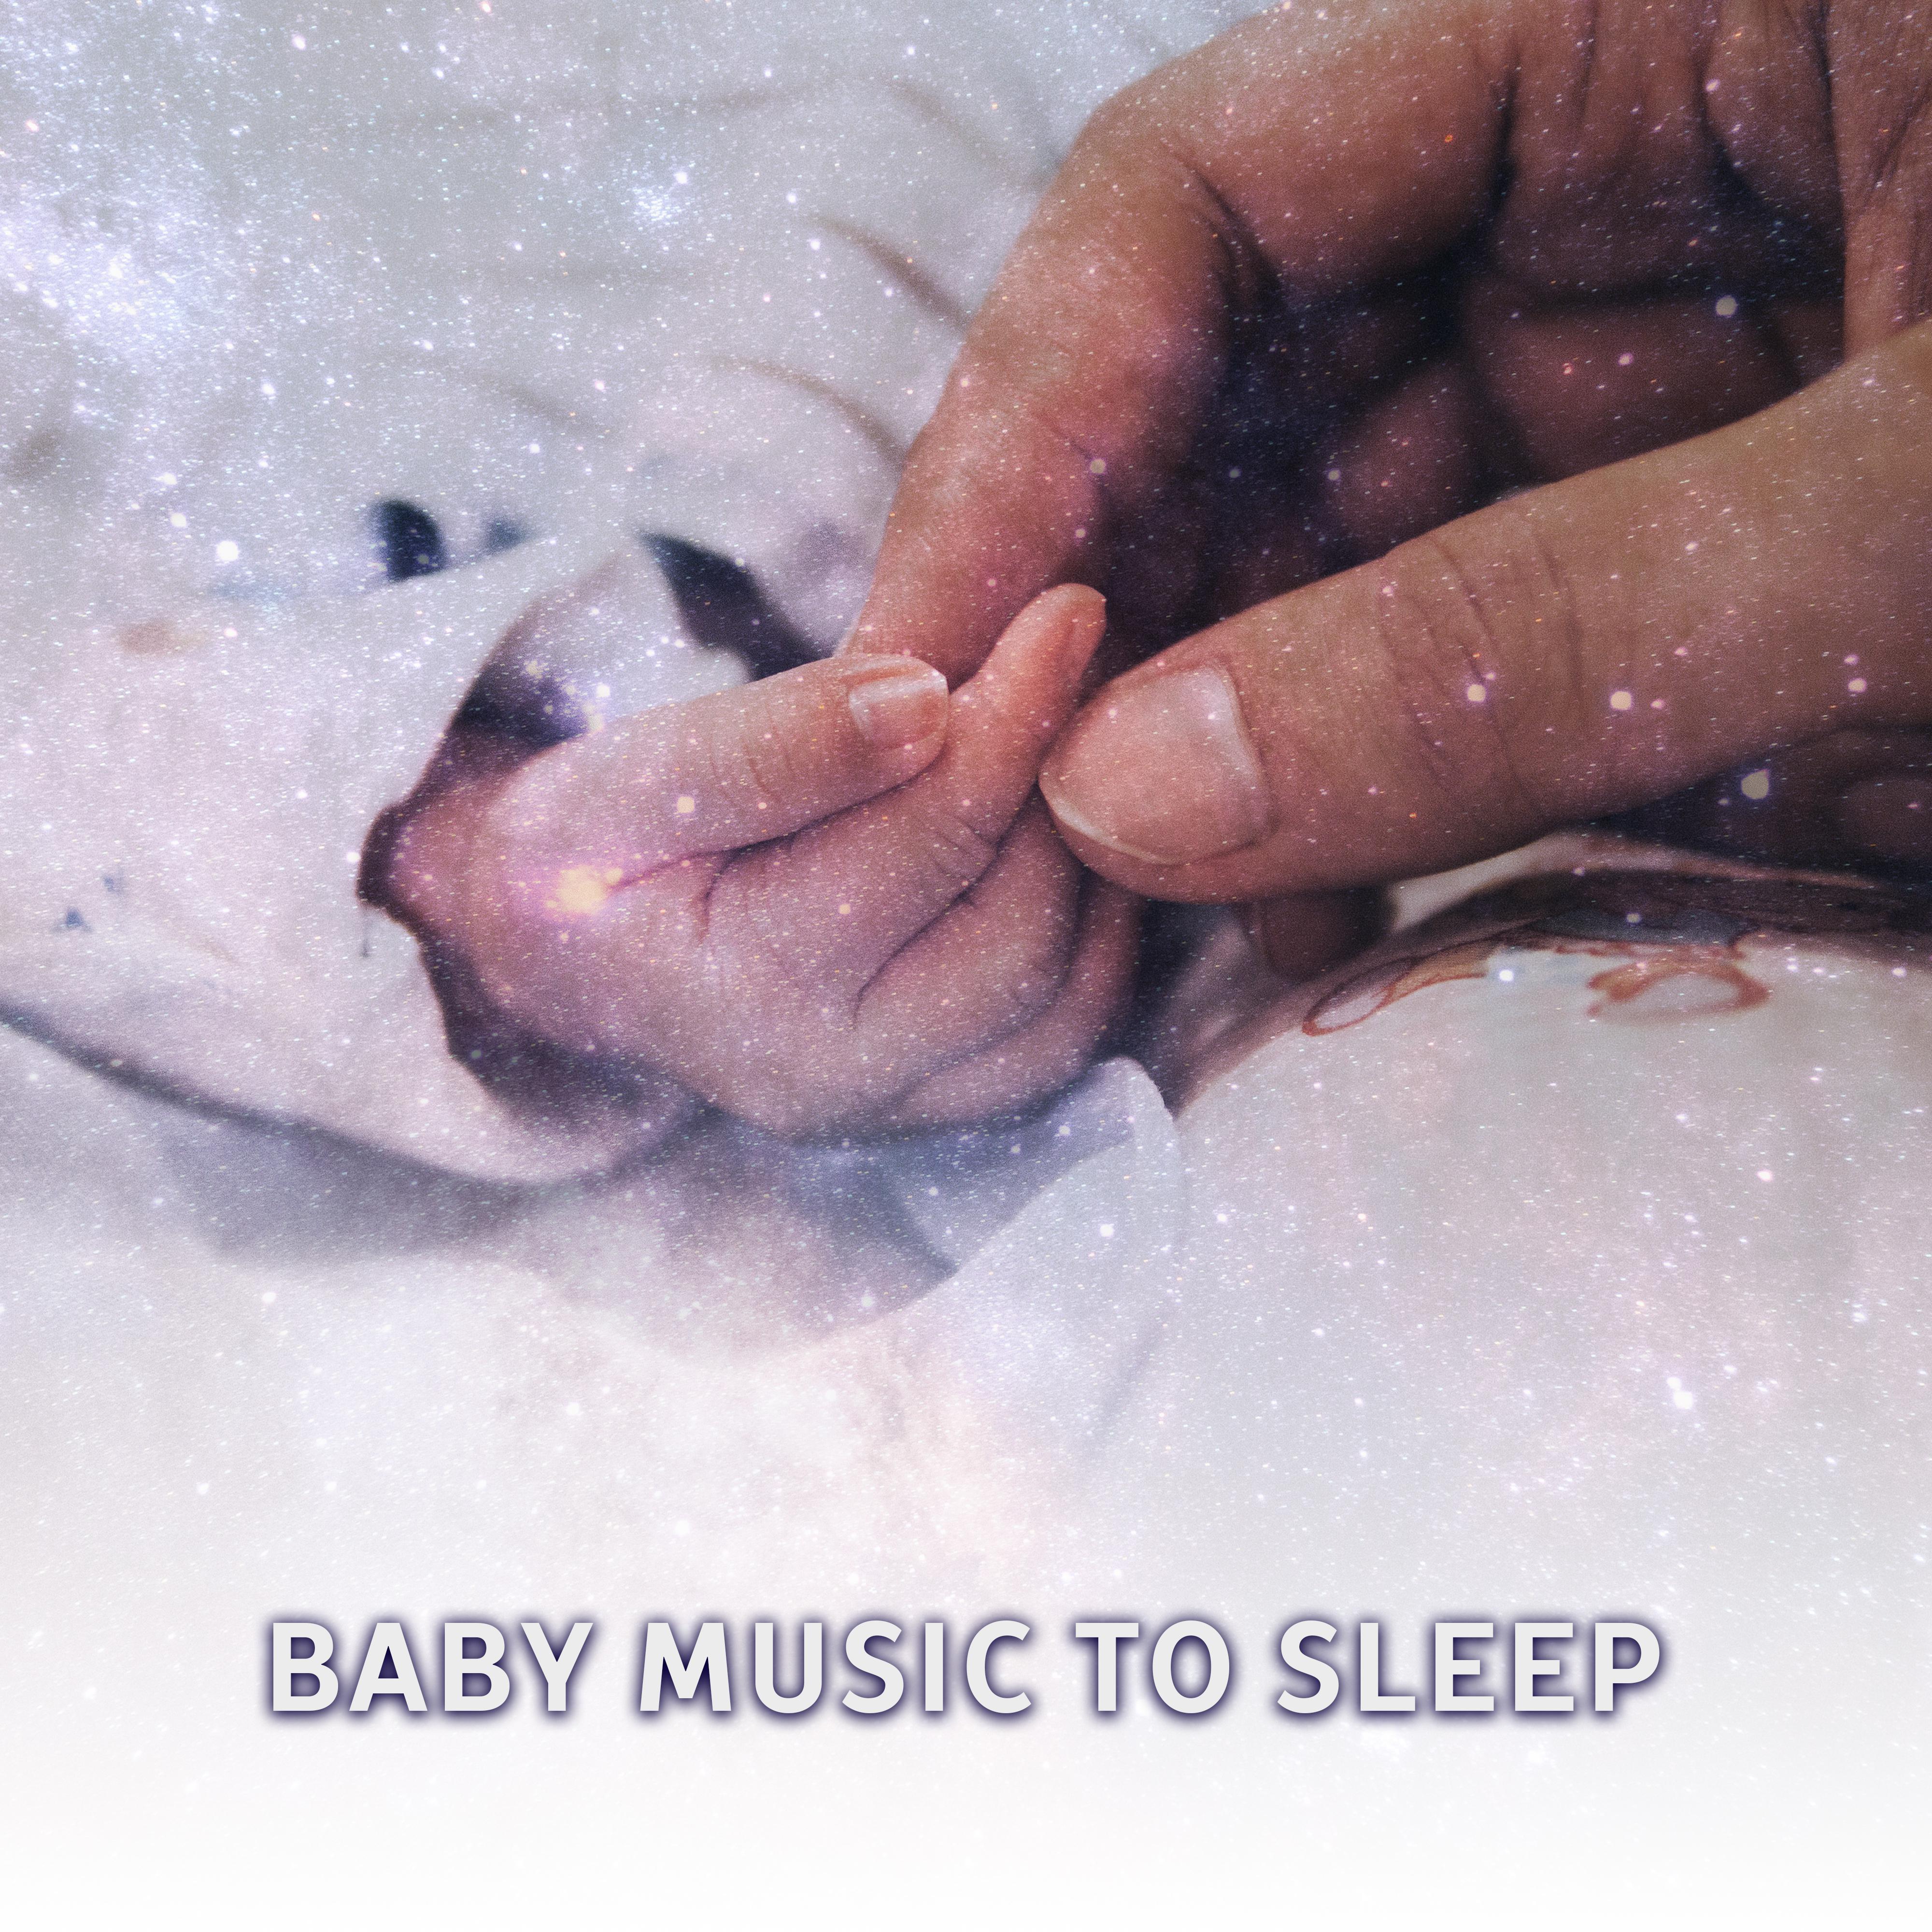 Baby Music to Sleep  Healing Lullabies, Sweet Dreams, Soothing Nature Sounds for Sleep, Relaxation, Baby Dreams, Soft Music at Goodnight